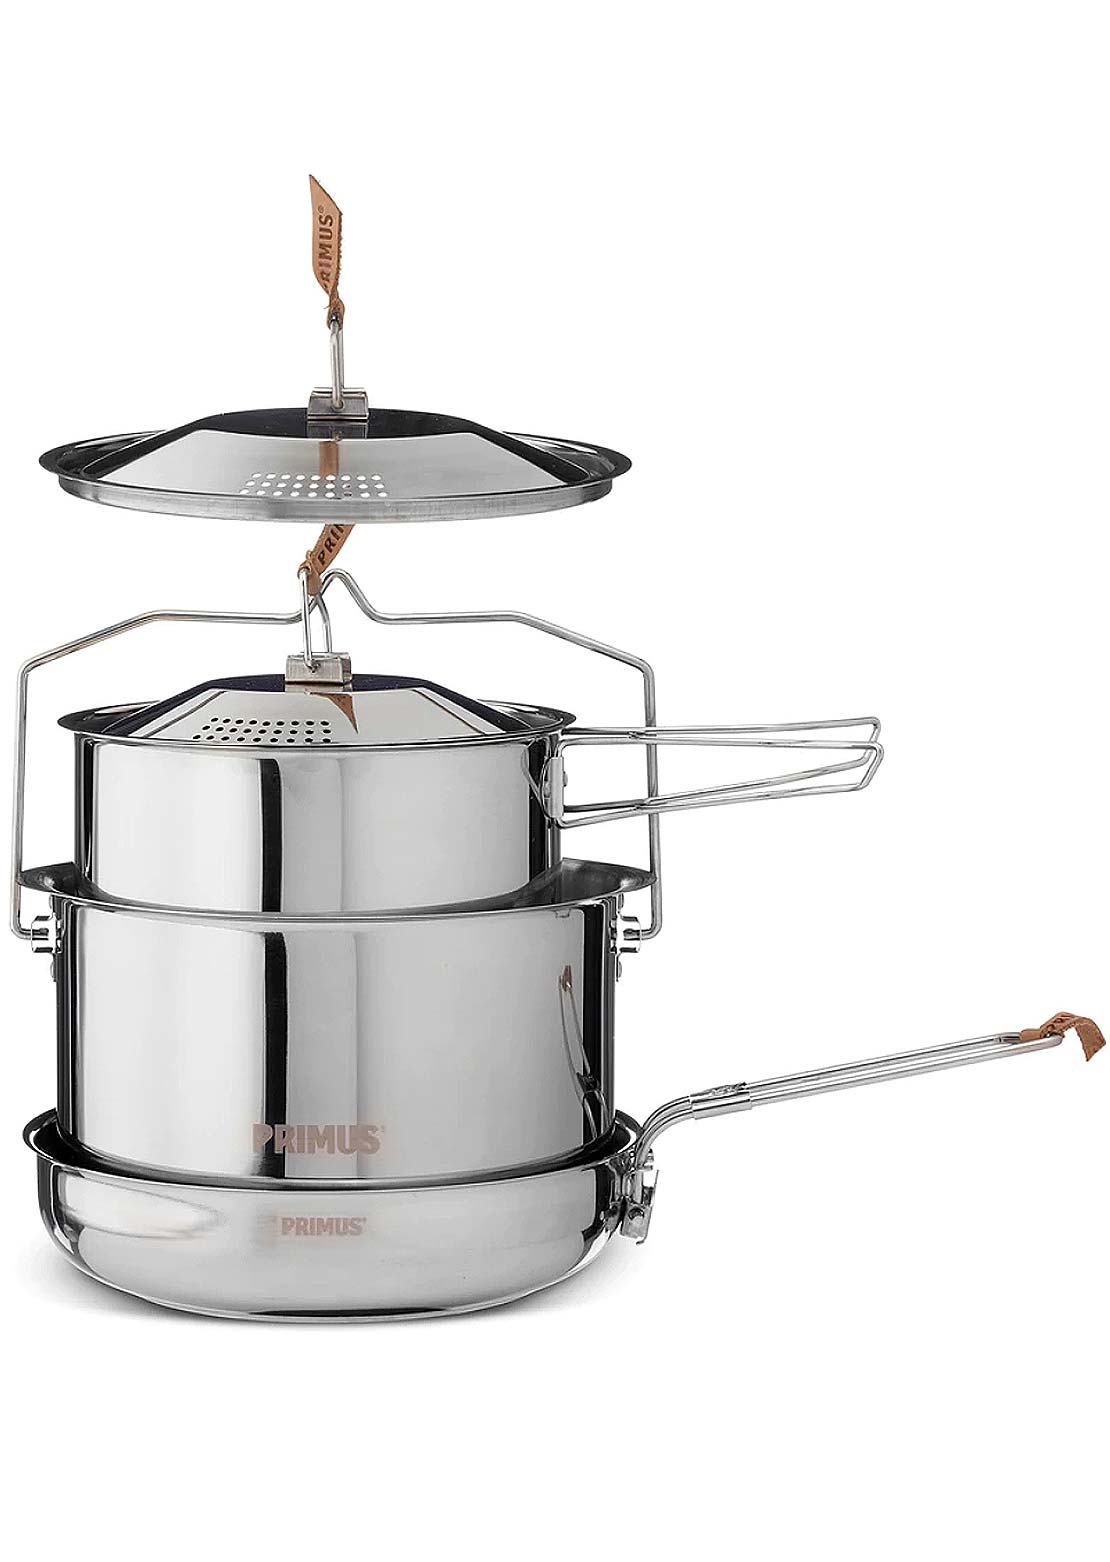 Primus Large Campfire Cookset Stainless Steel